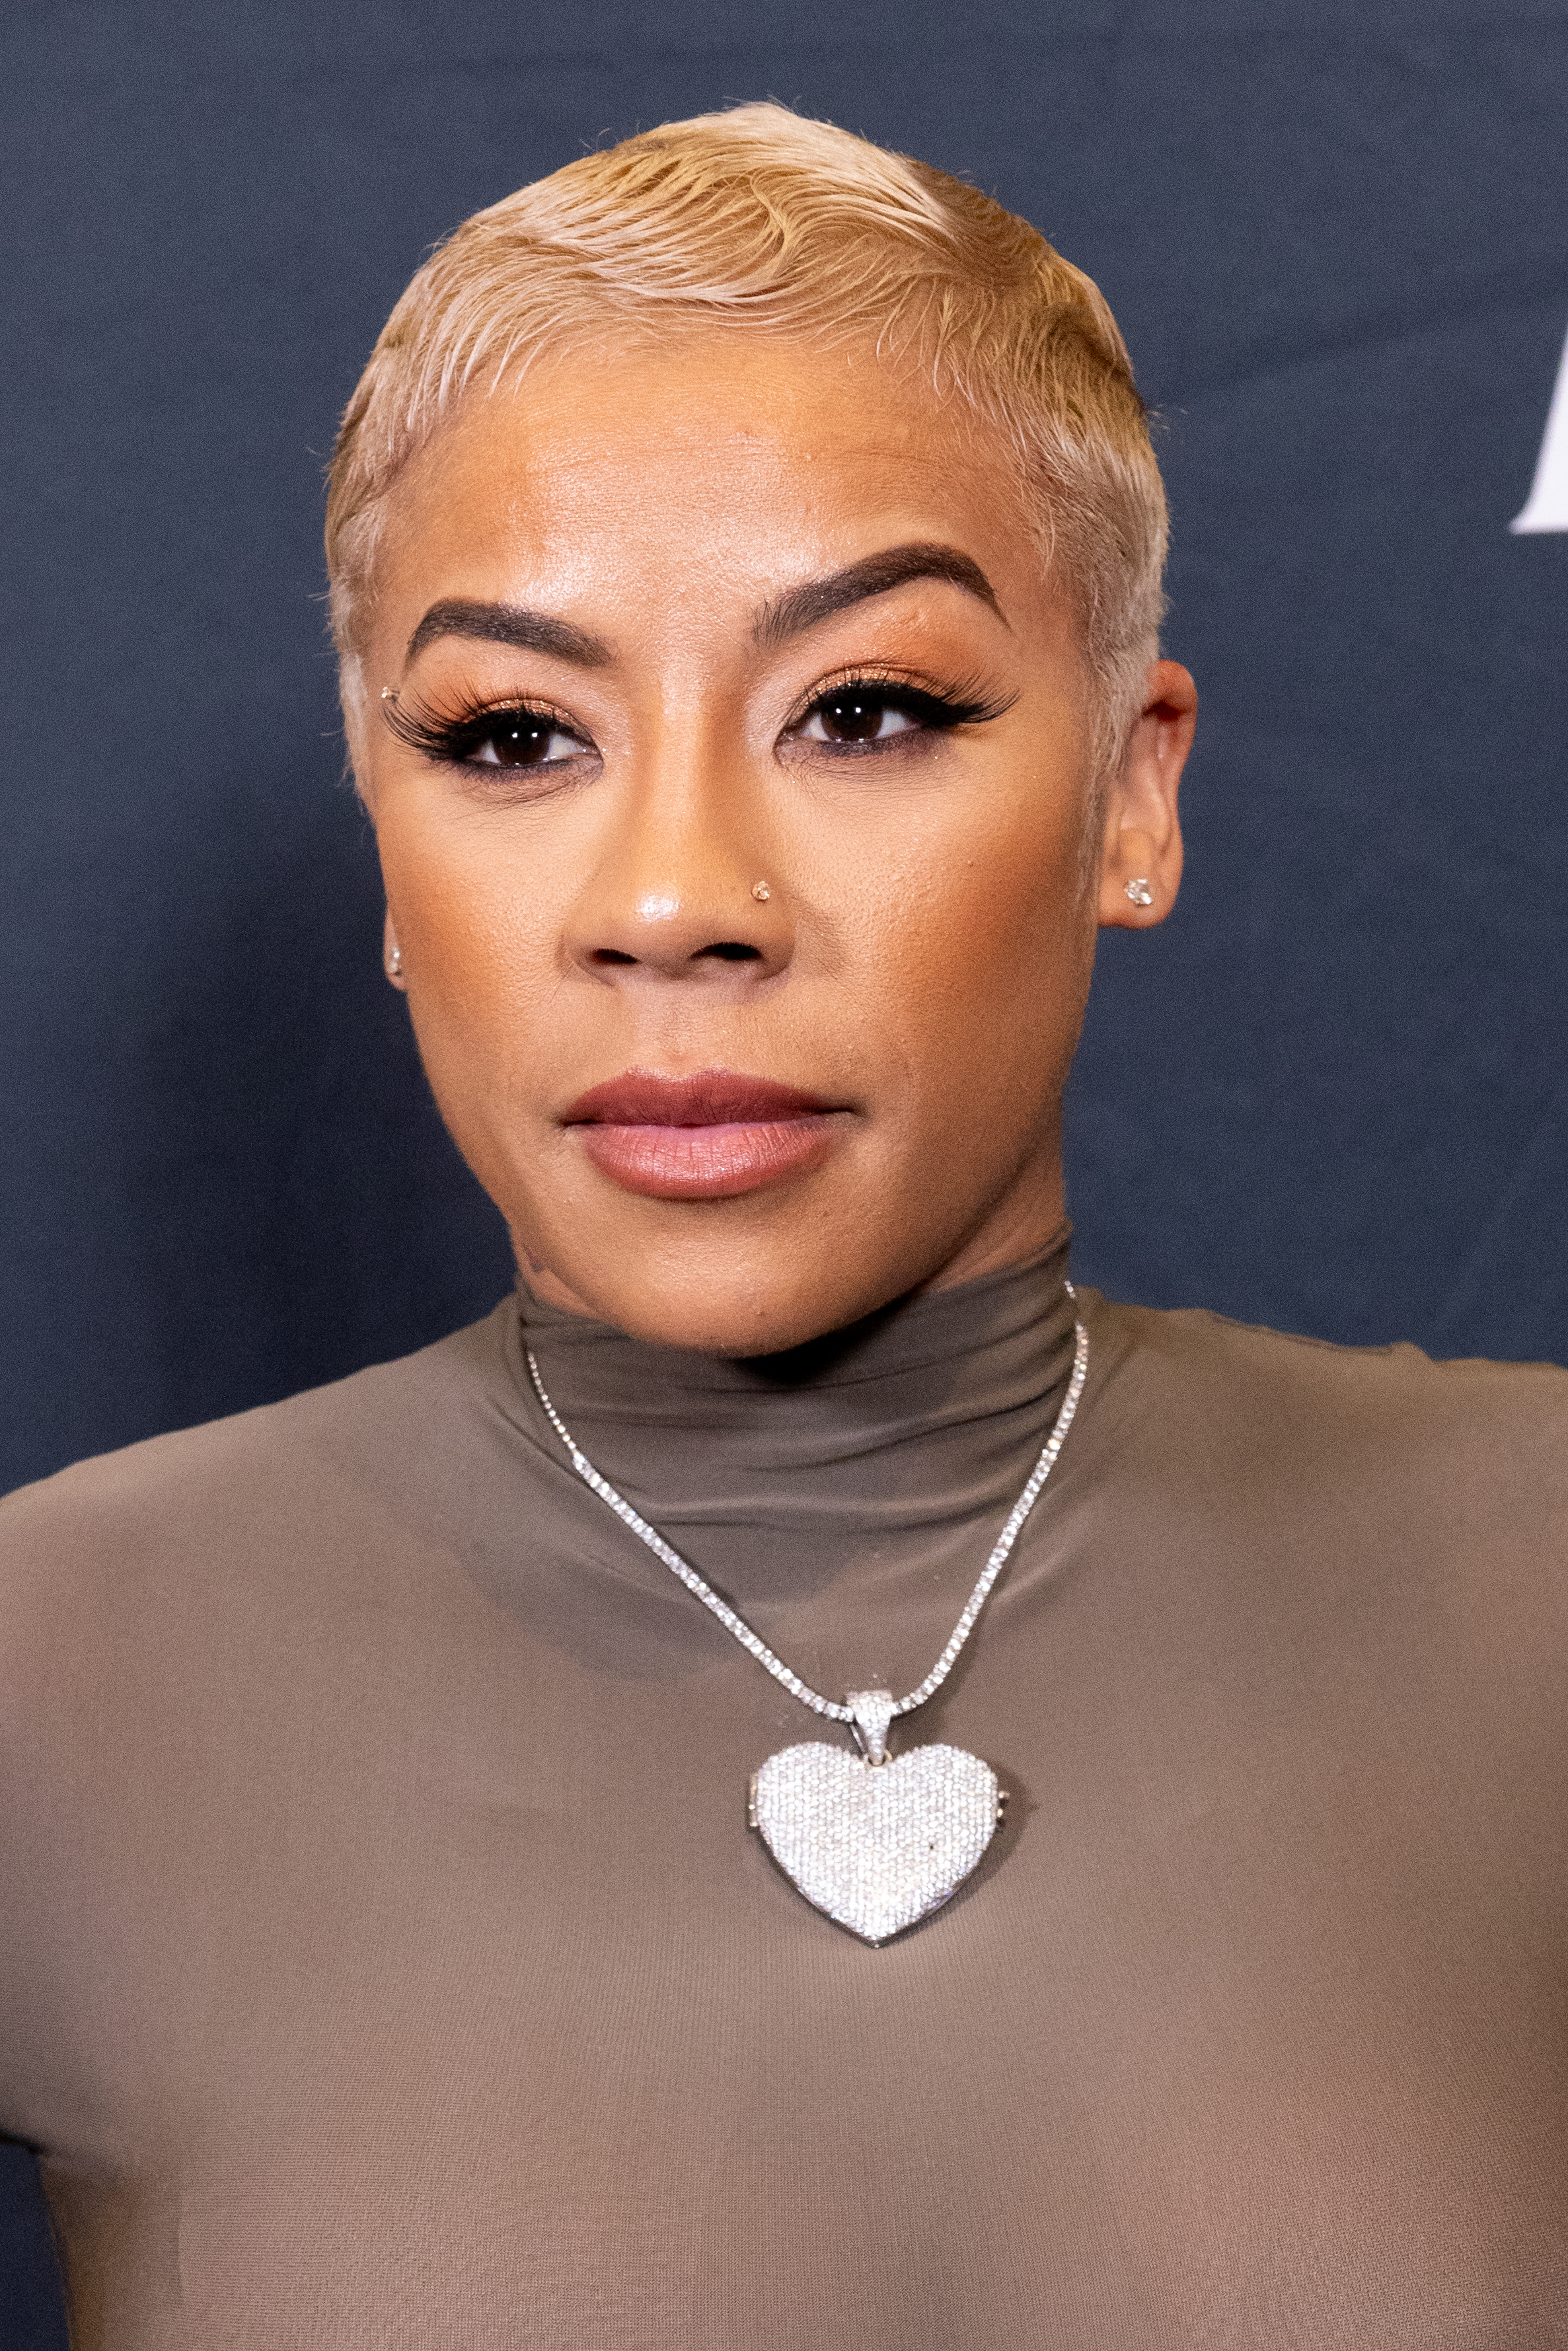 Keyshia Cole at the world premiere screening of "Keyshia Cole: This is my story" on June 21, 2023, in Los Angeles, California | Source: Getty Images